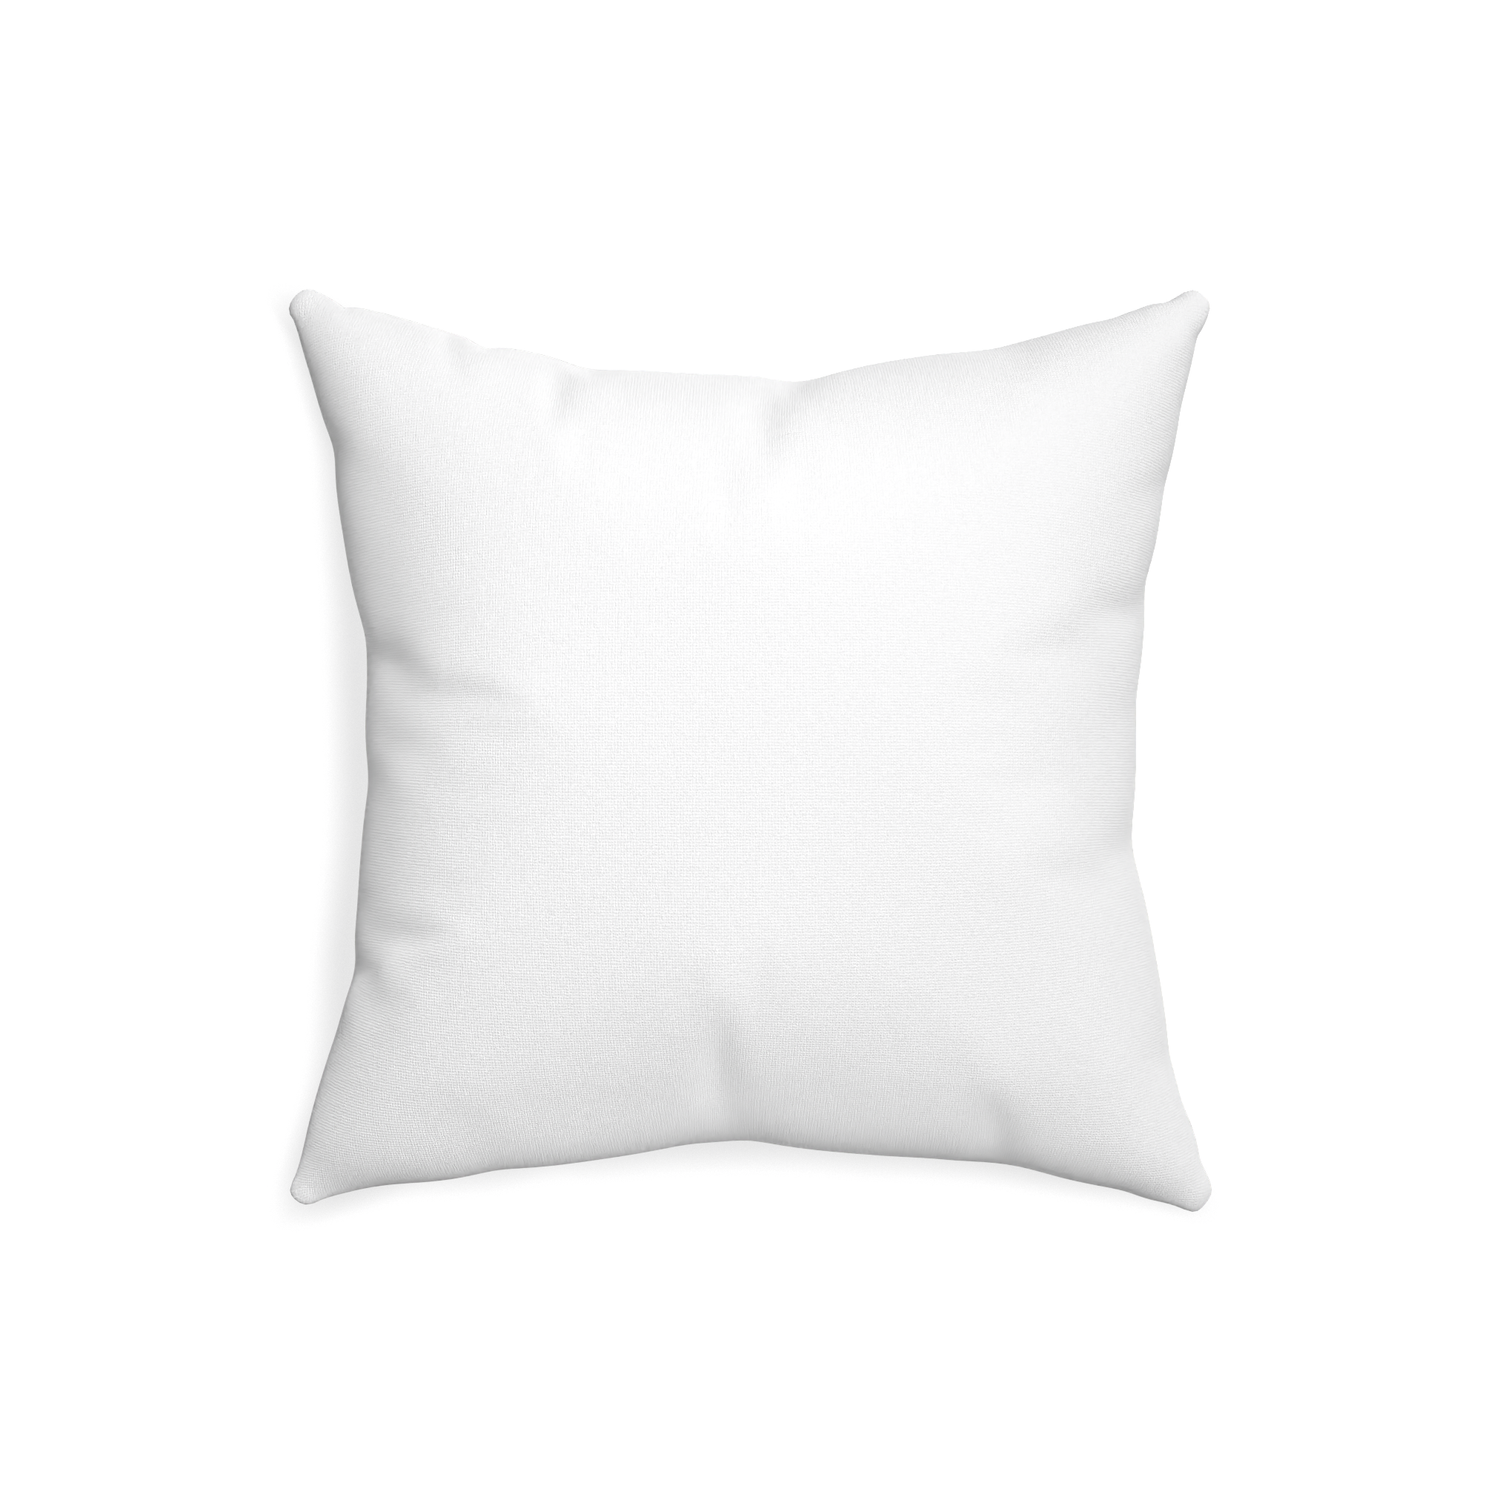 20-square snow custom white cottonpillow with none on white background